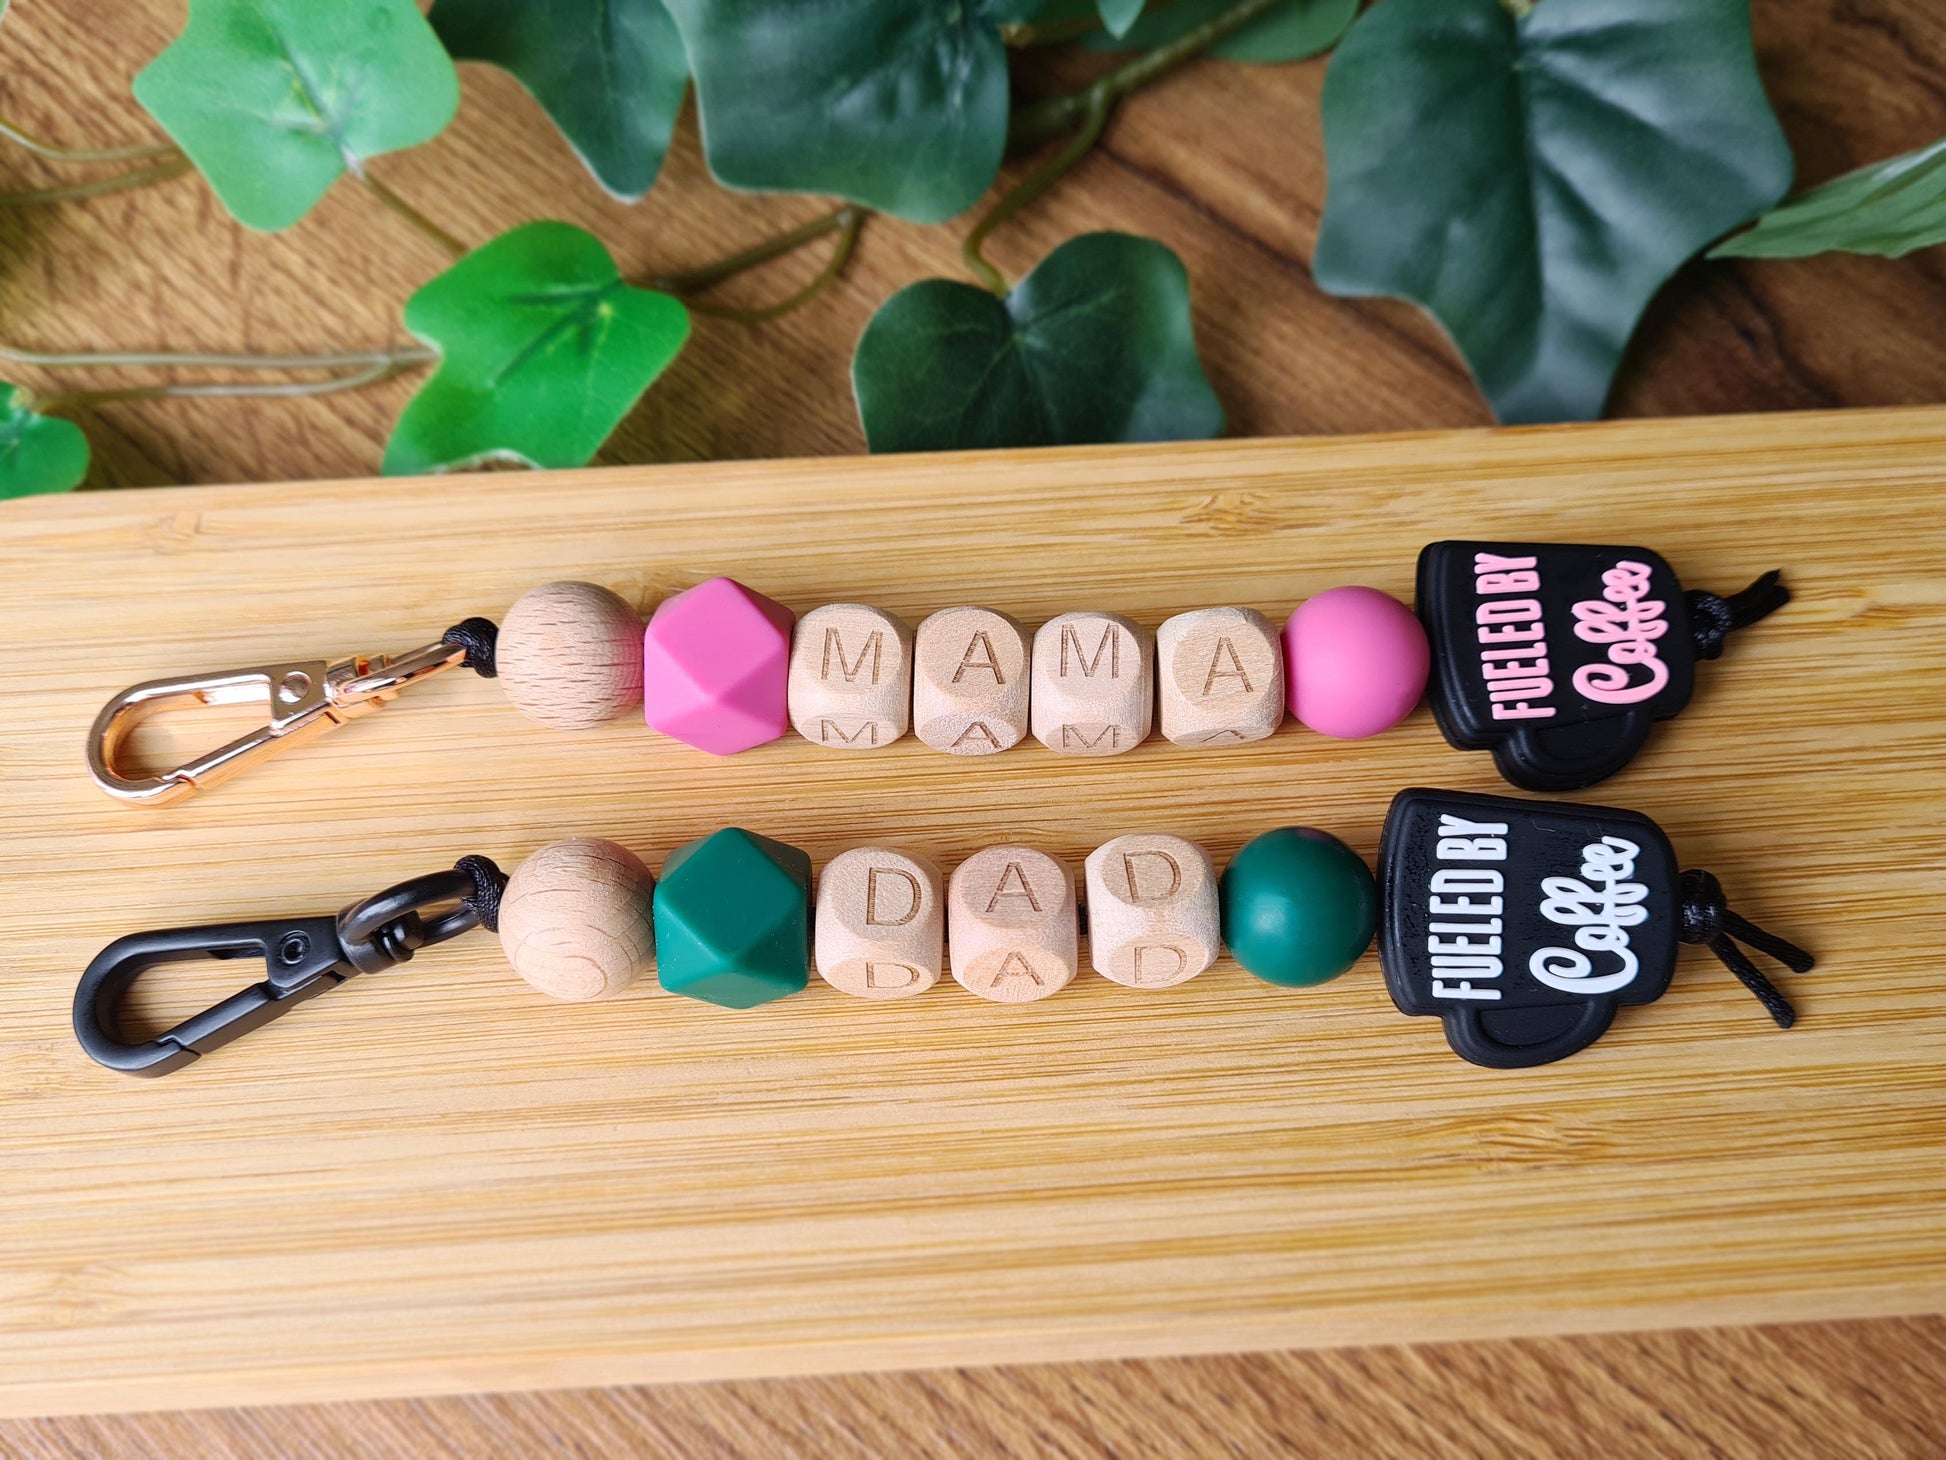 Looking for gift ideas for mam? Our handmade Mama Needs Coffee keychains make the perfect gift for mothers who may have found a new desire for buckets of coffee!